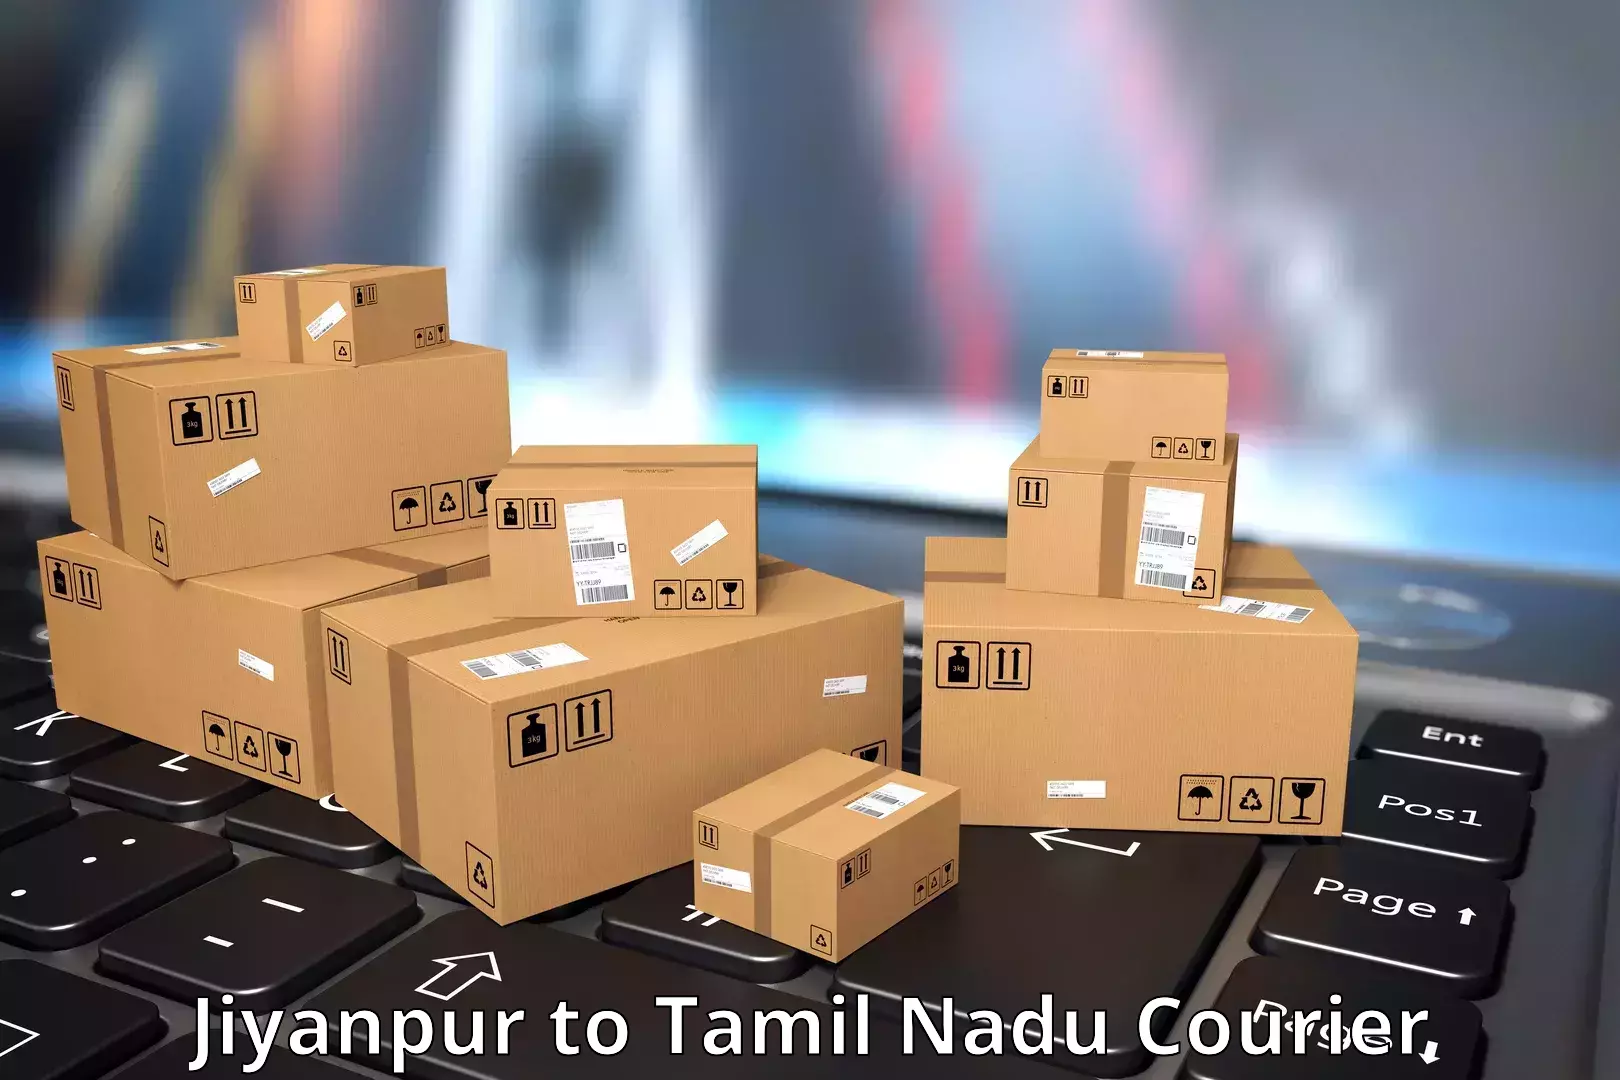 Reliable courier services Jiyanpur to Periyakulam